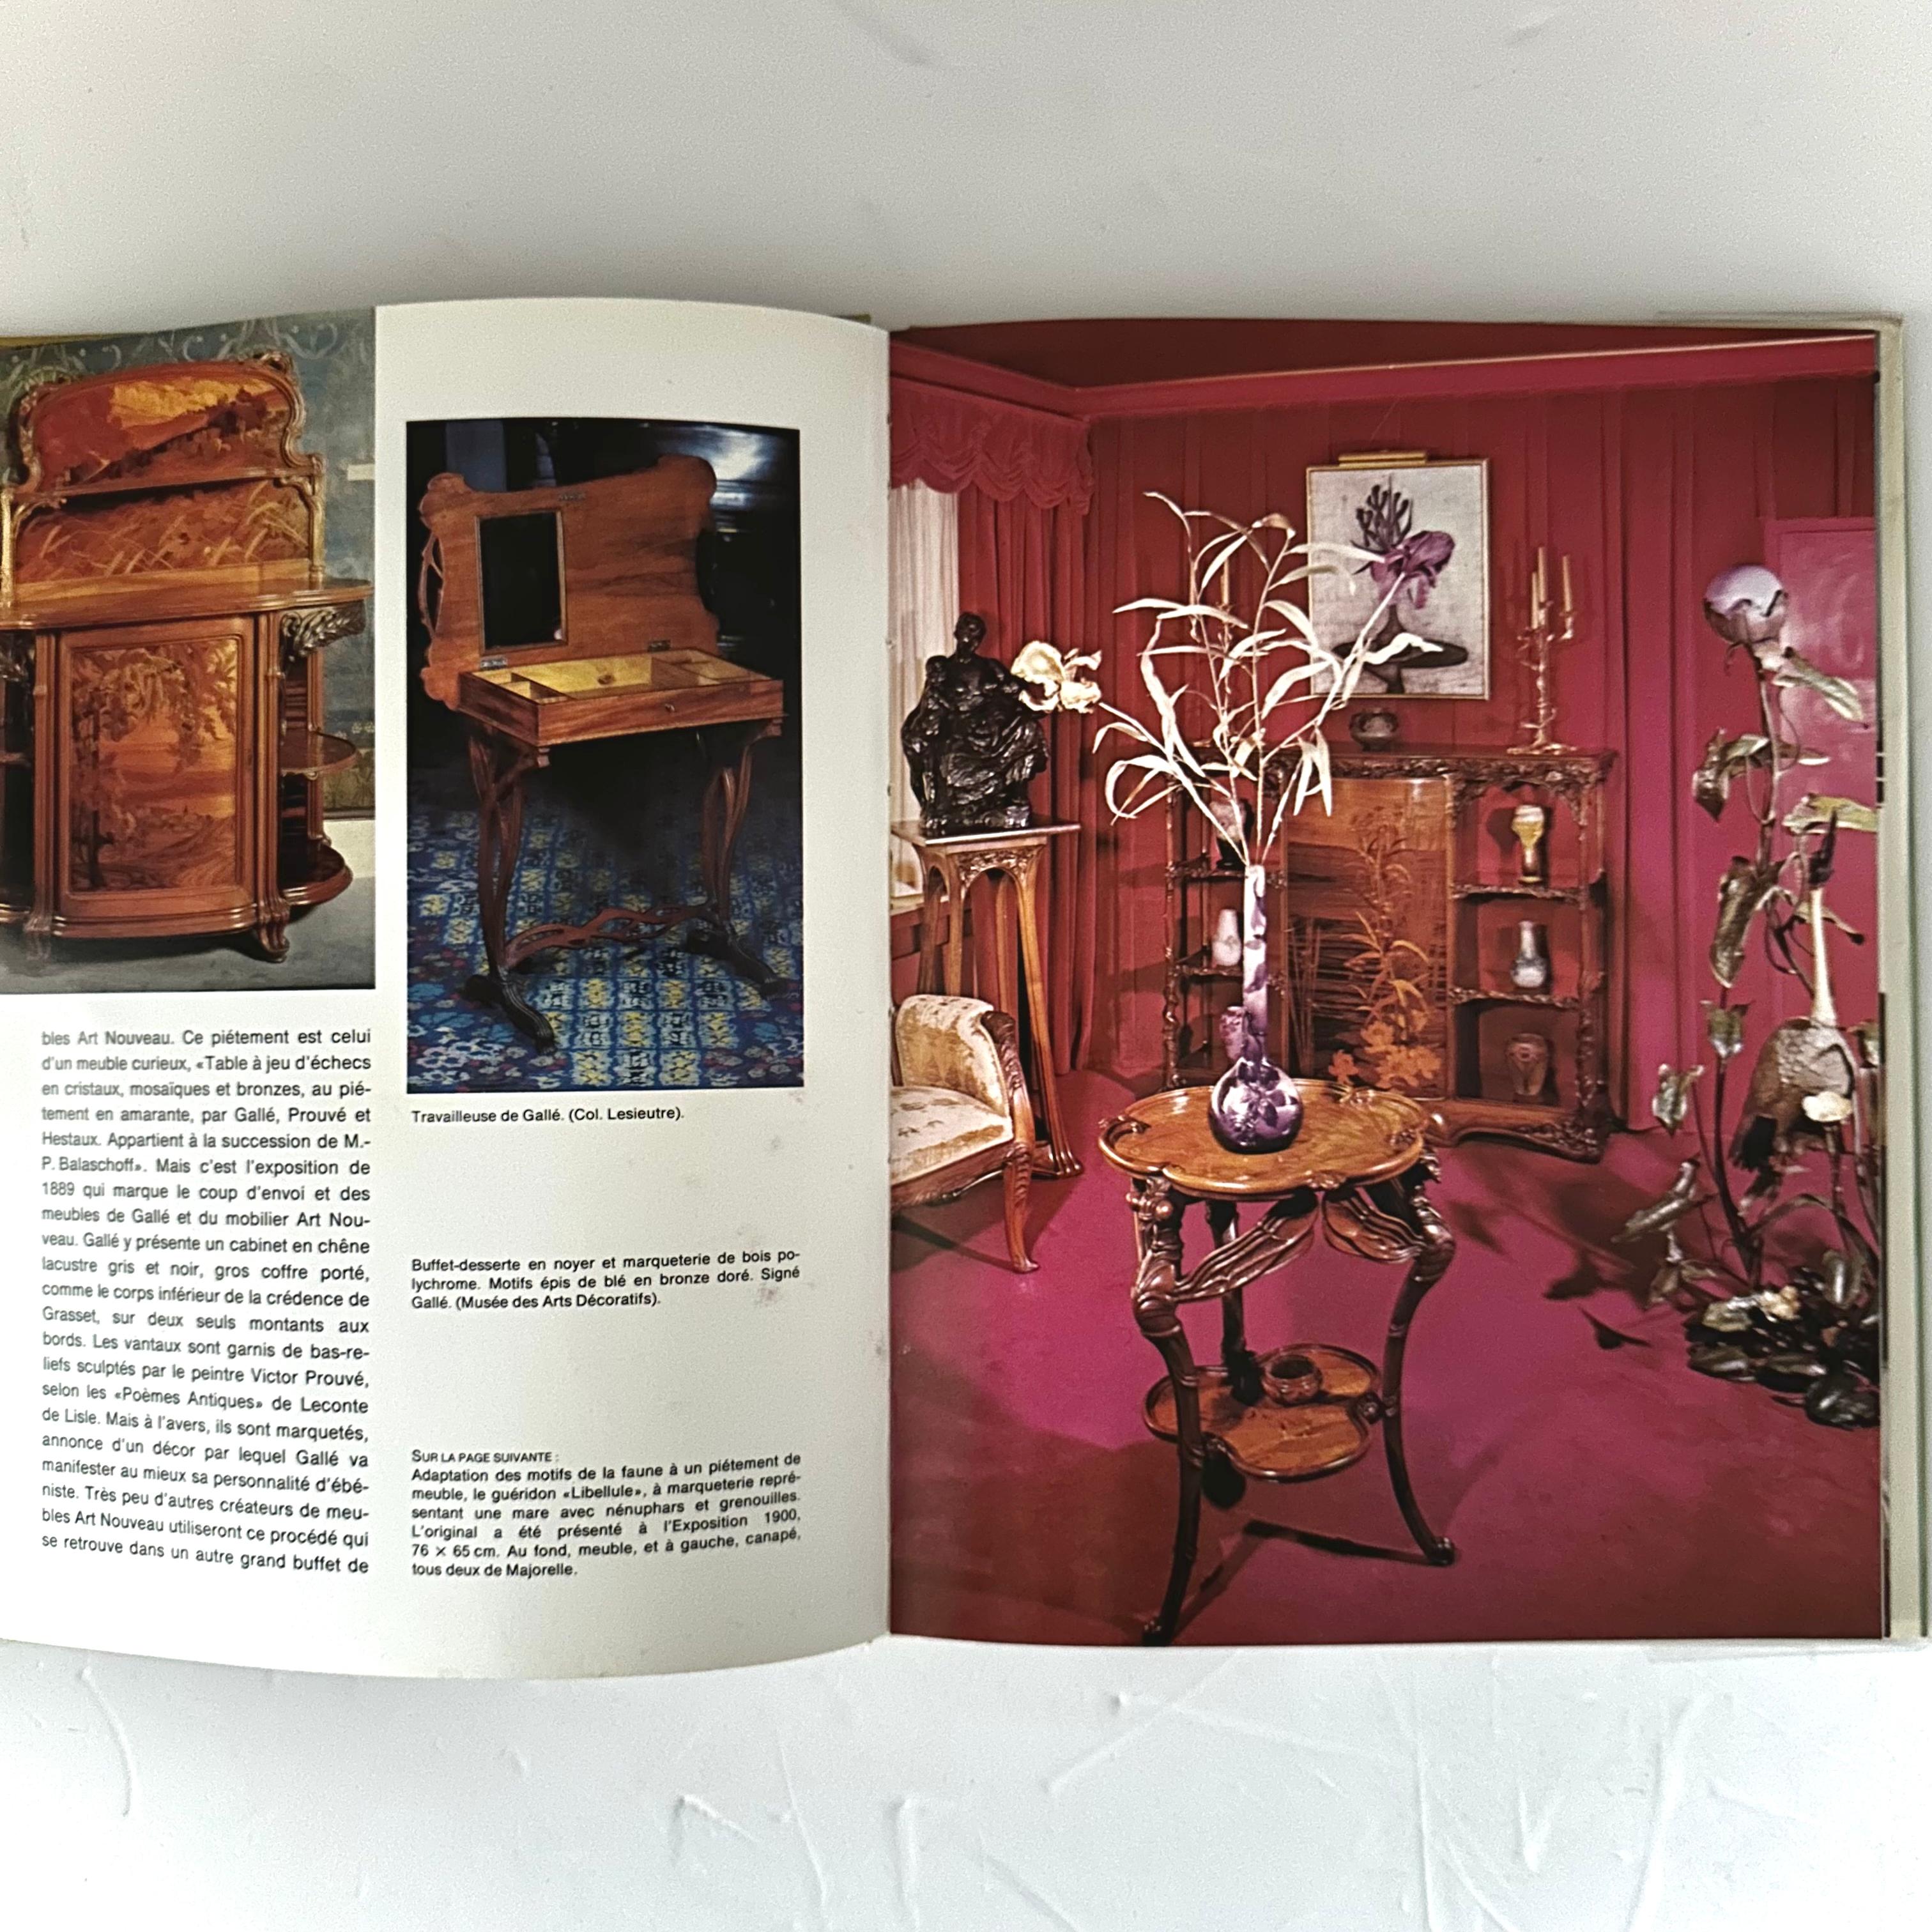  Published by Editions CH. MASSIN, 1st edition Paris, early 60s. Hardback with French text.

A beautiful book on French furniture innovations and the most eminent makers during the first quarter of the twentieth century. Profusely illustrated with